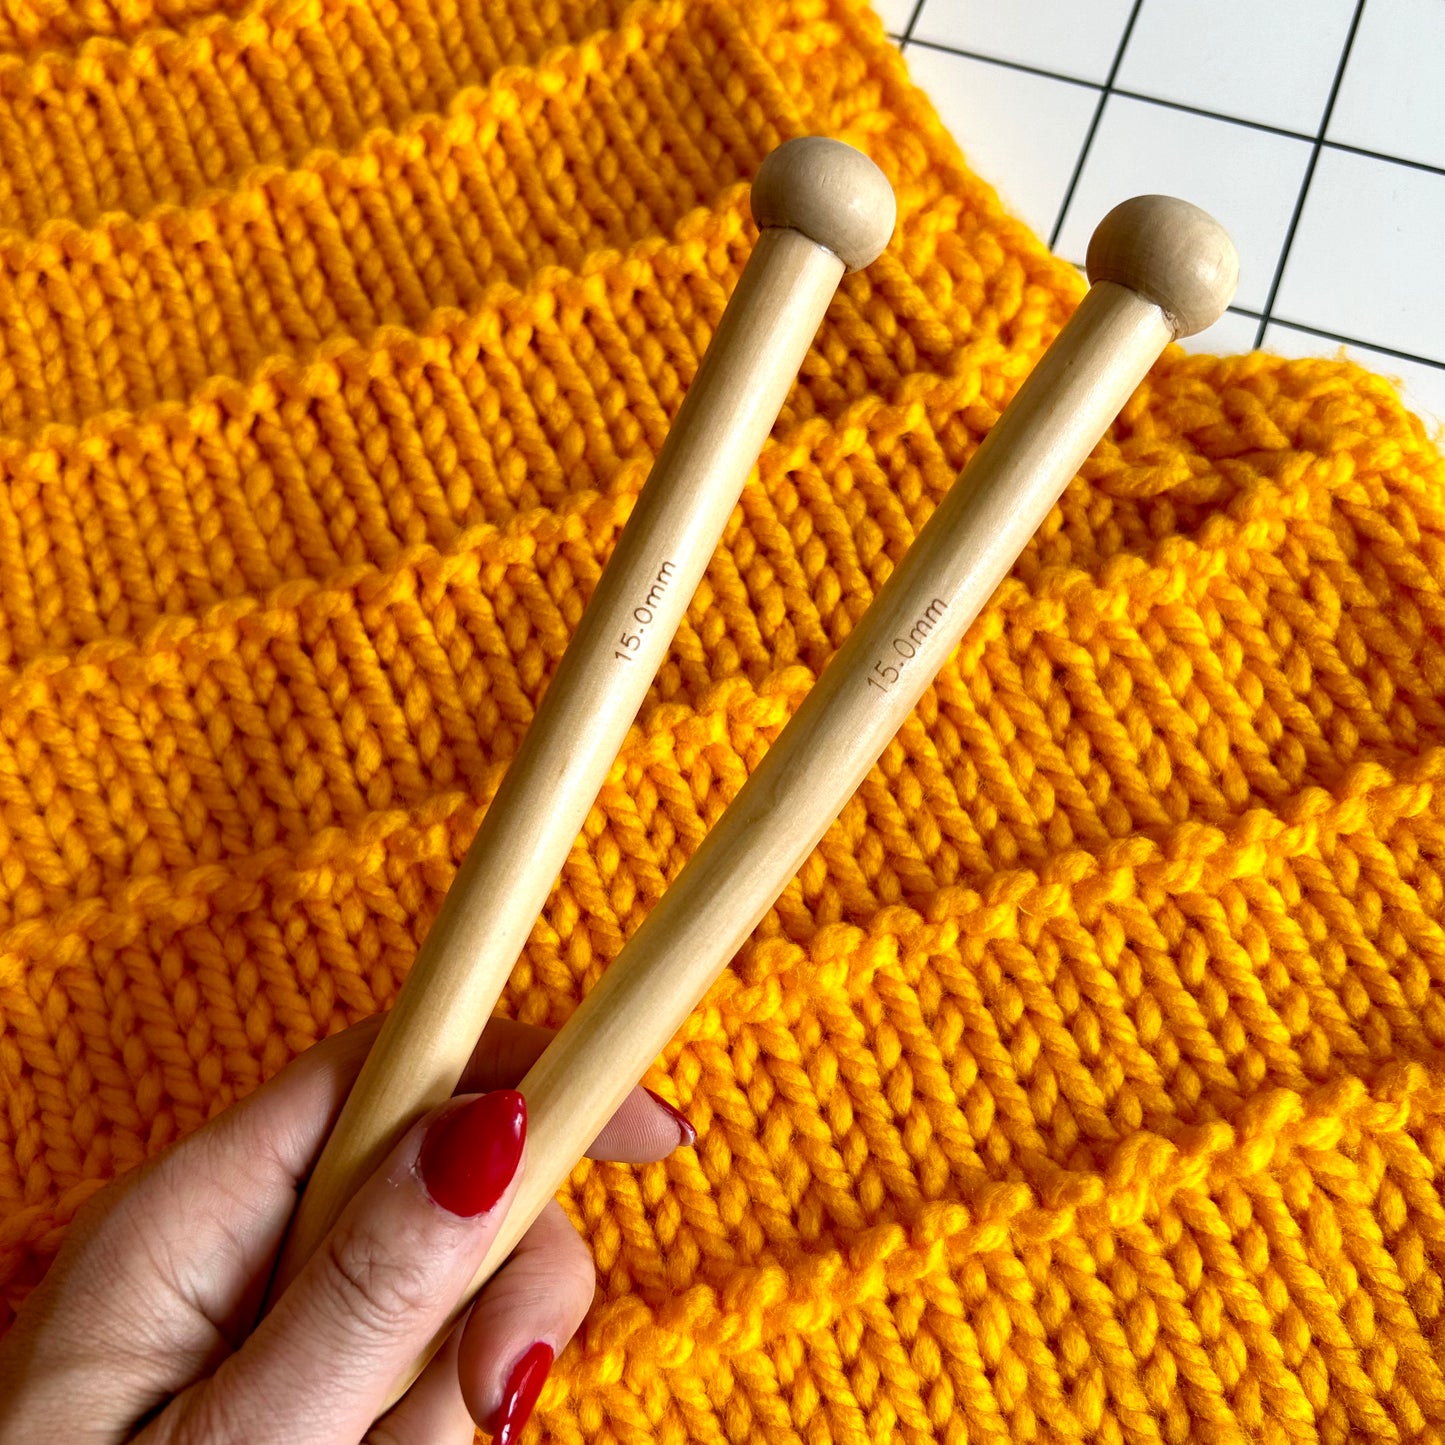 What is knitting gauge and what knitting needles size should I use?